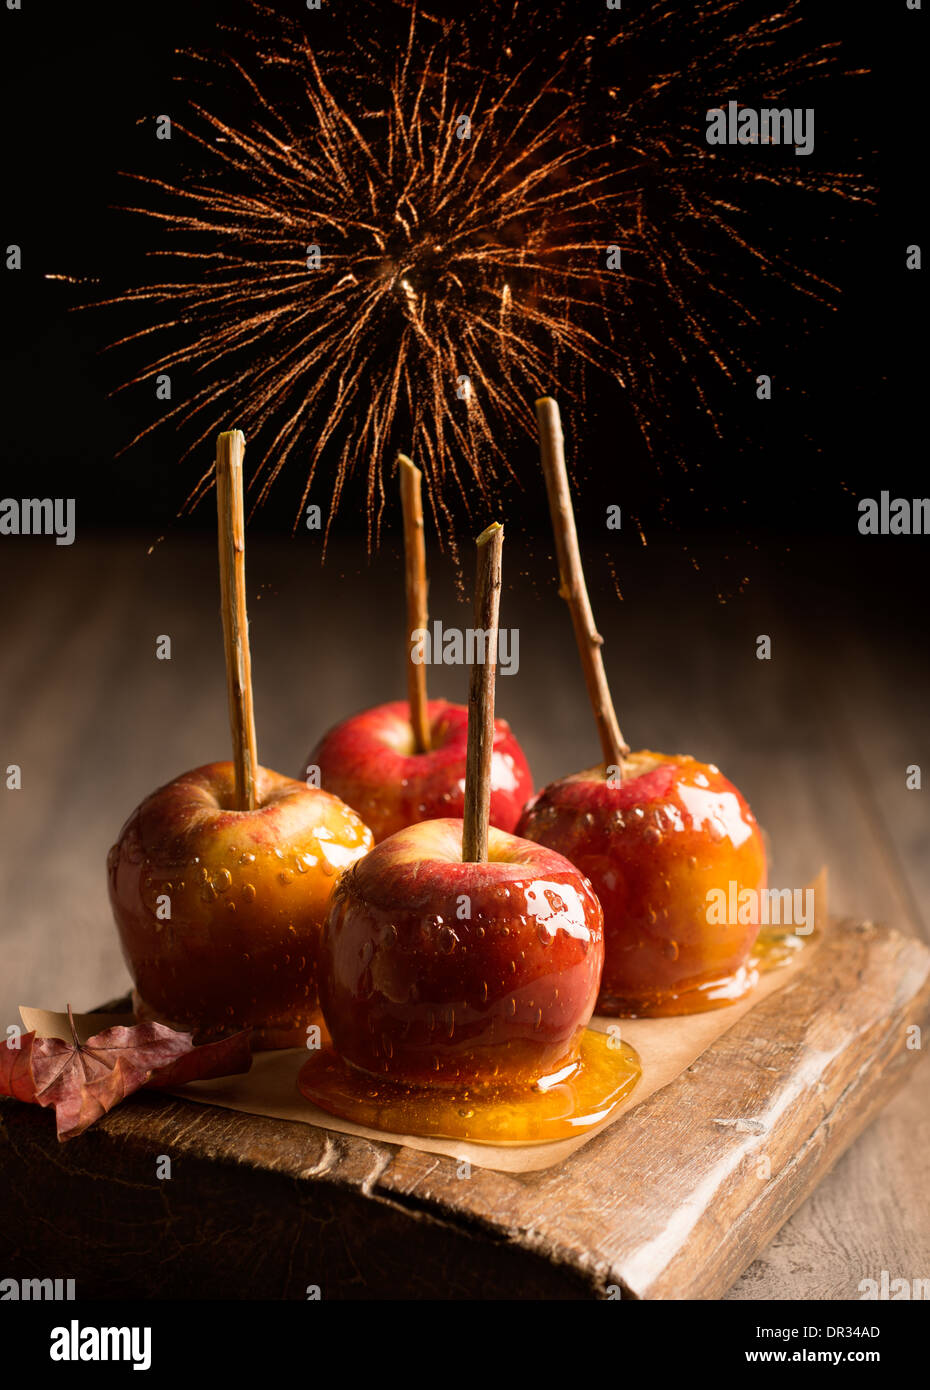 Group of toffee apples on rustic wooden board with fireworks in the background Stock Photo